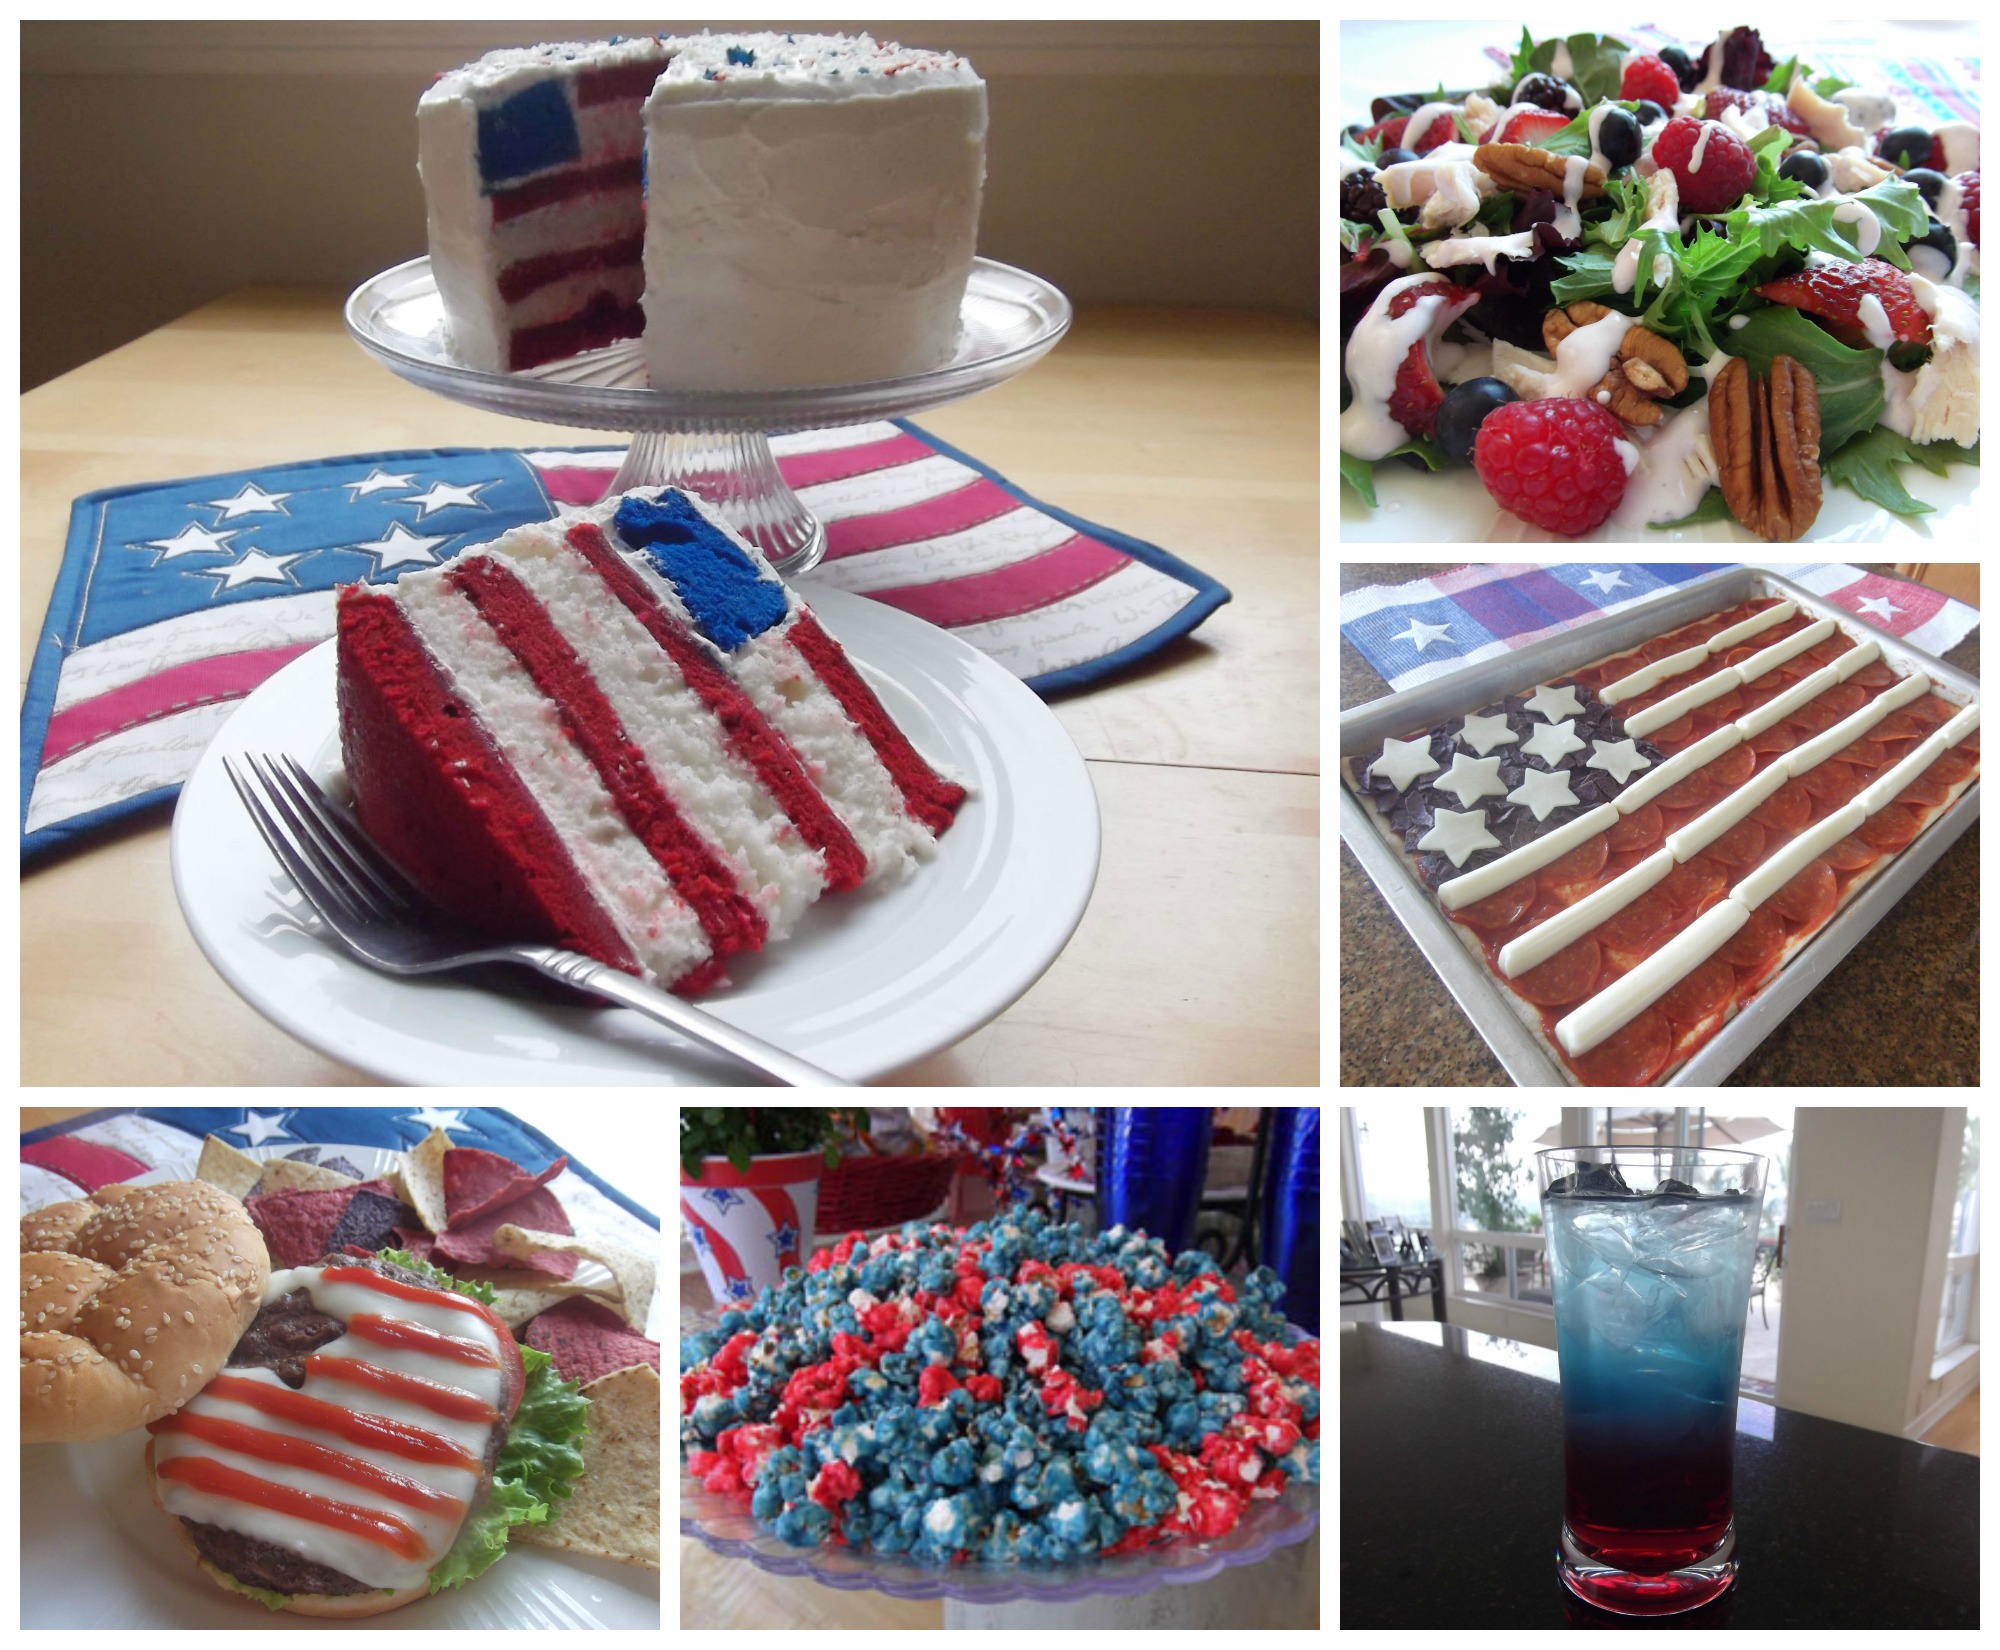 Recipes for July 4th